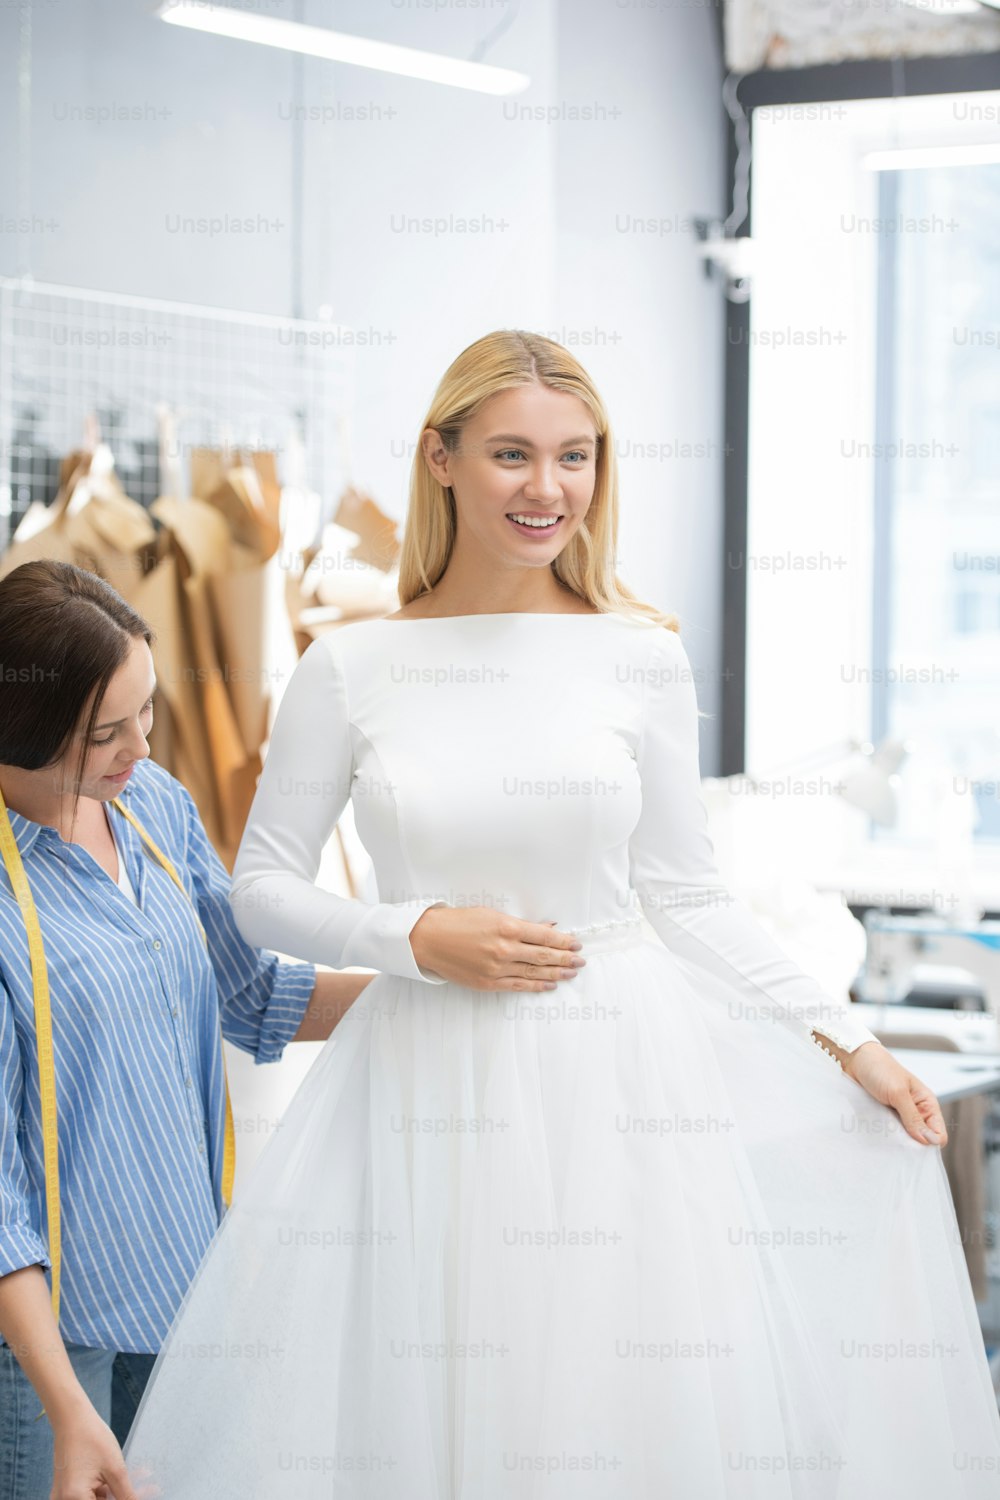 Happy blond-haired bride excited about wedding dress sewed by tailor in dressmaking studio